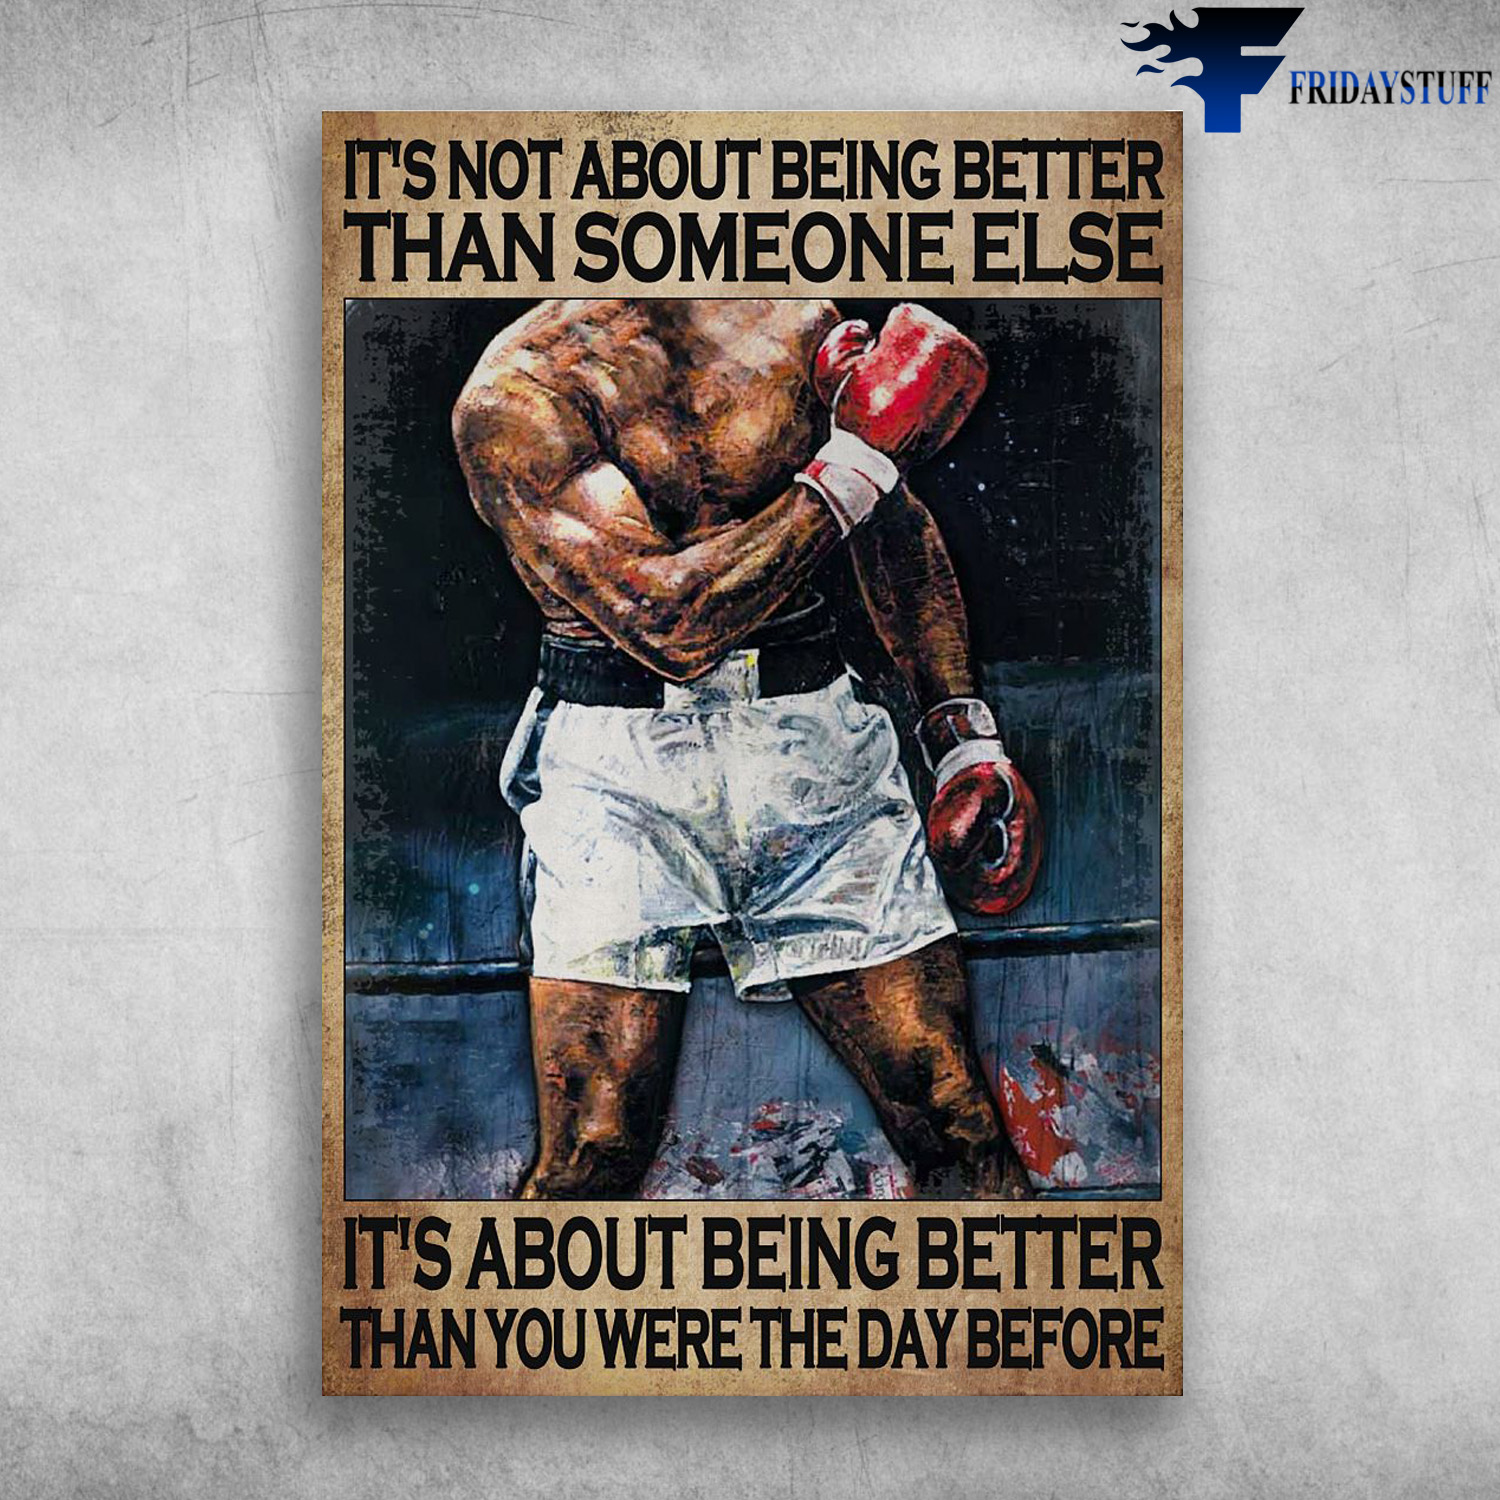 Boxing Man - It's Not About Being Better Than Someone Else, It's About Being Better Than You Were The Day Before